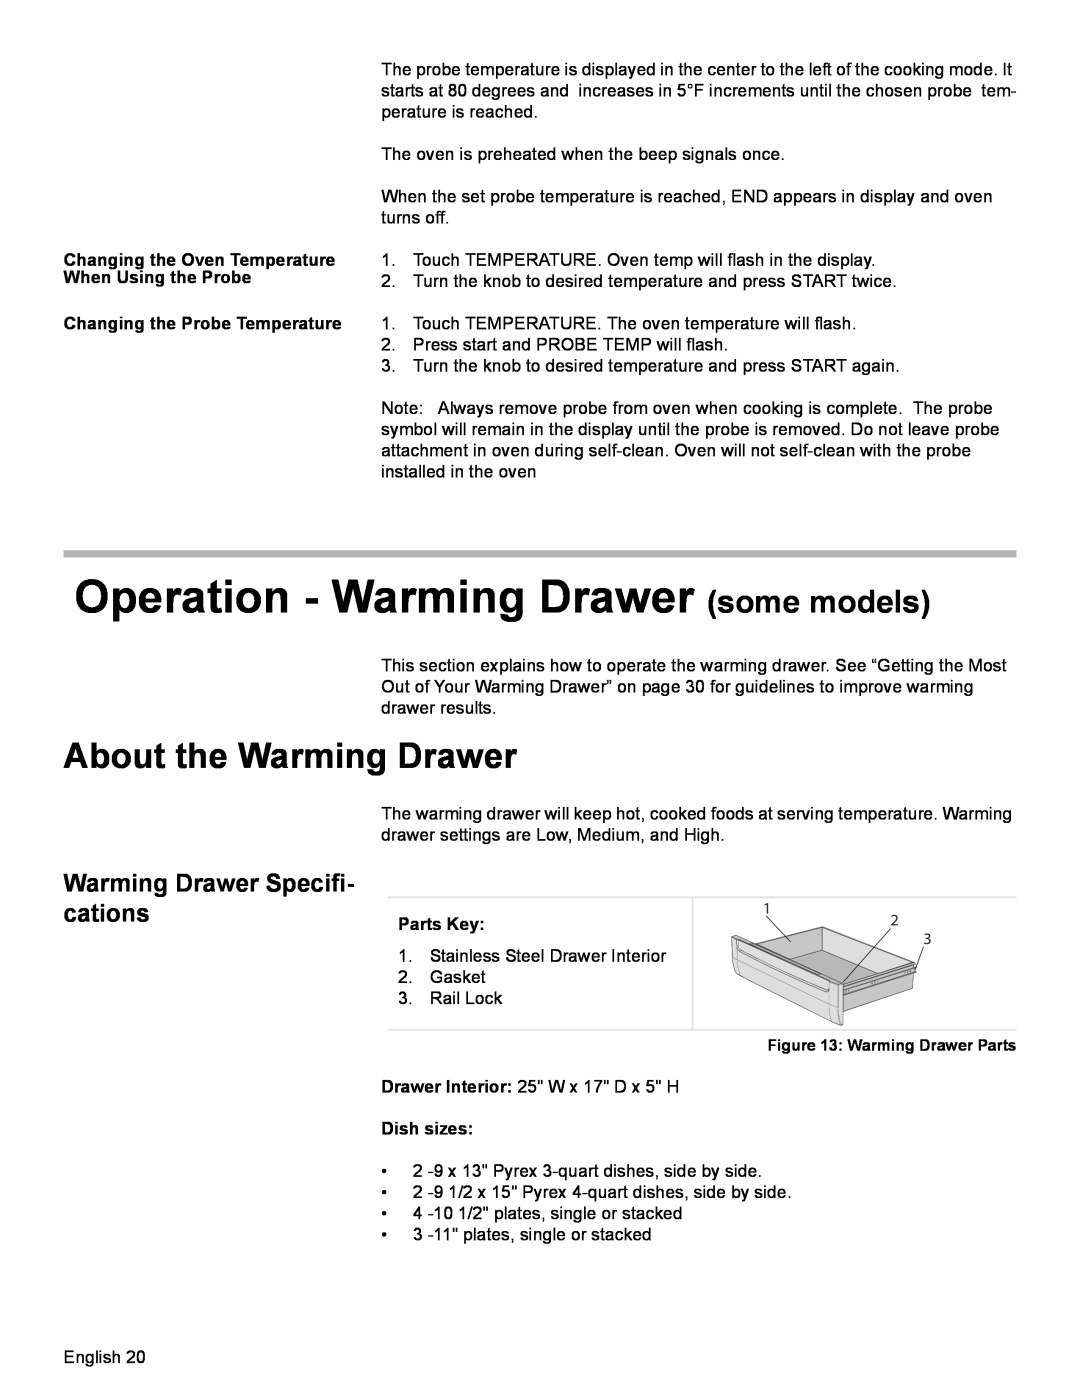 Bosch Appliances HES7282U Operation - Warming Drawer some models, About the Warming Drawer, Changing the Probe Temperature 